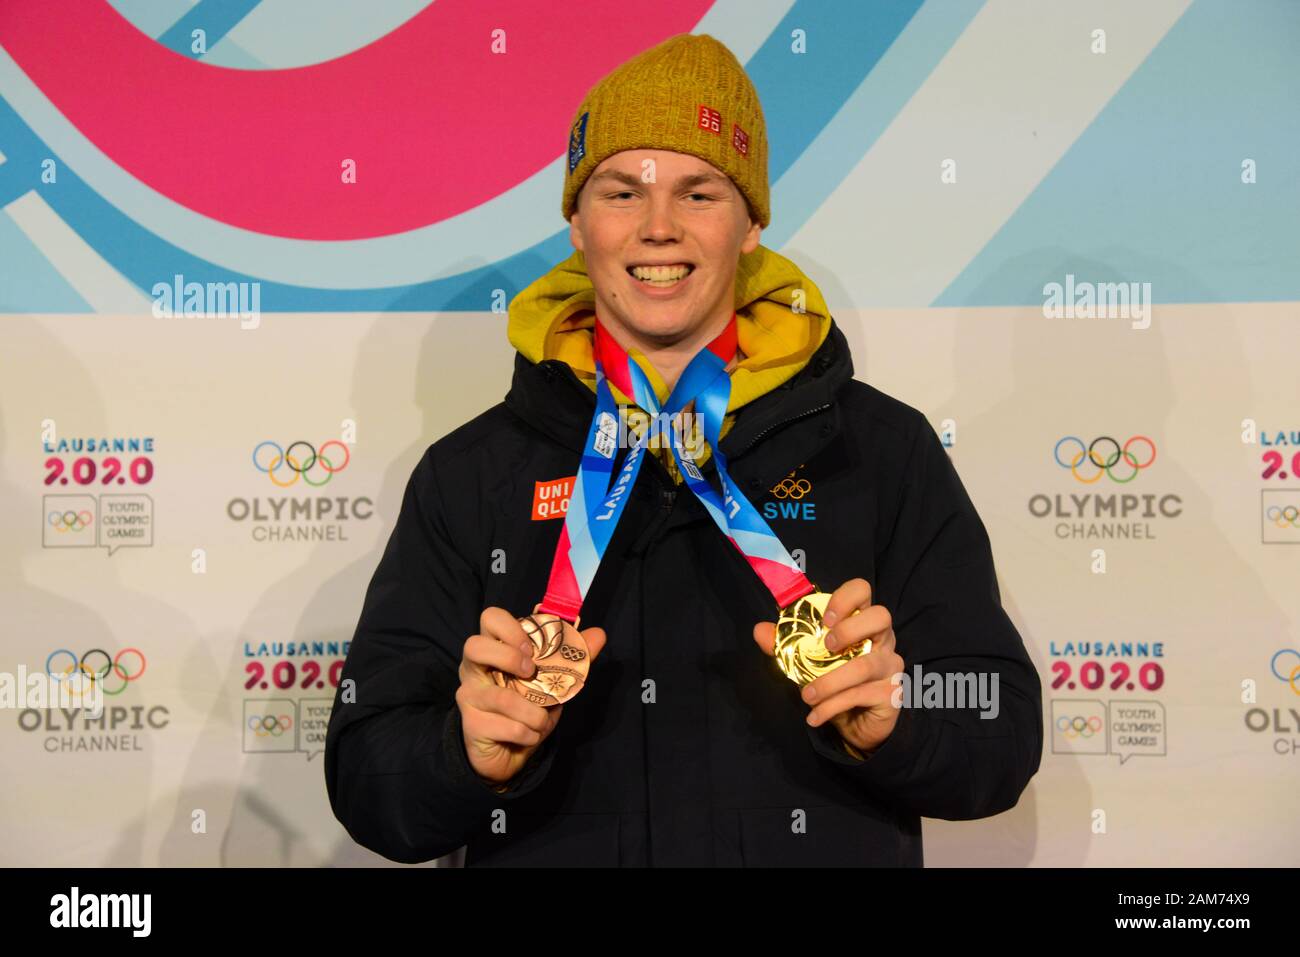 Lausanne, Switzerland. 11th Jan, 2020. Ski racer Adam Hofstedt of Sweden  with his 2 medals from ski racing events in the 2020 Winter Youth Olympic  Games in Lausanne Switzerland. Credit: Christopher Levy/ZUMA